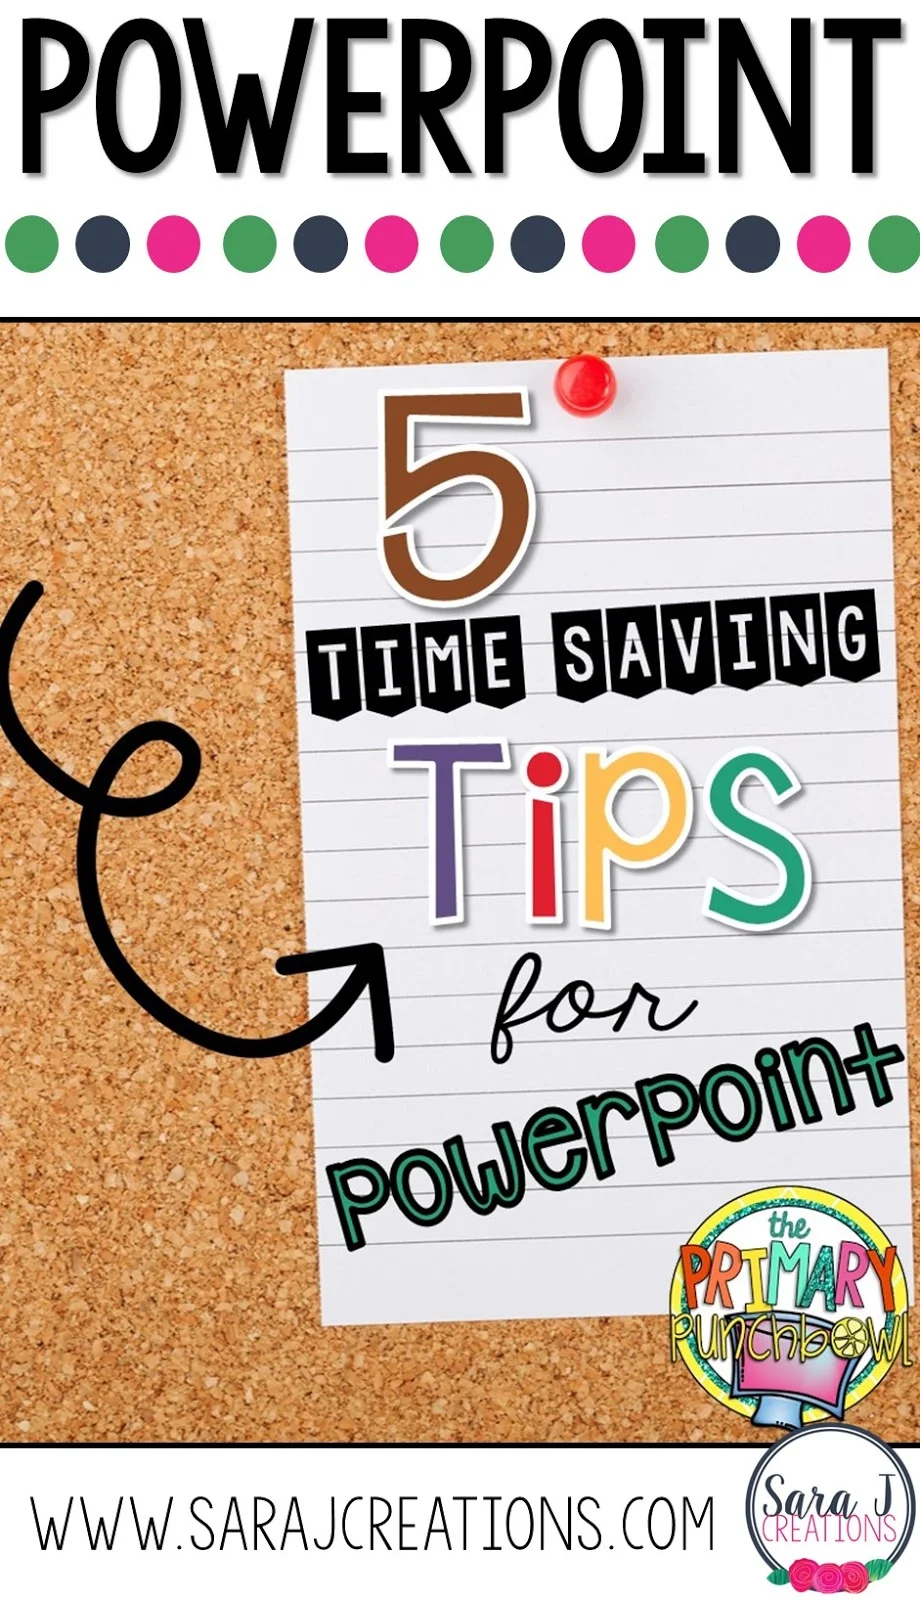 Tips for saving time on Microsoft Power Point